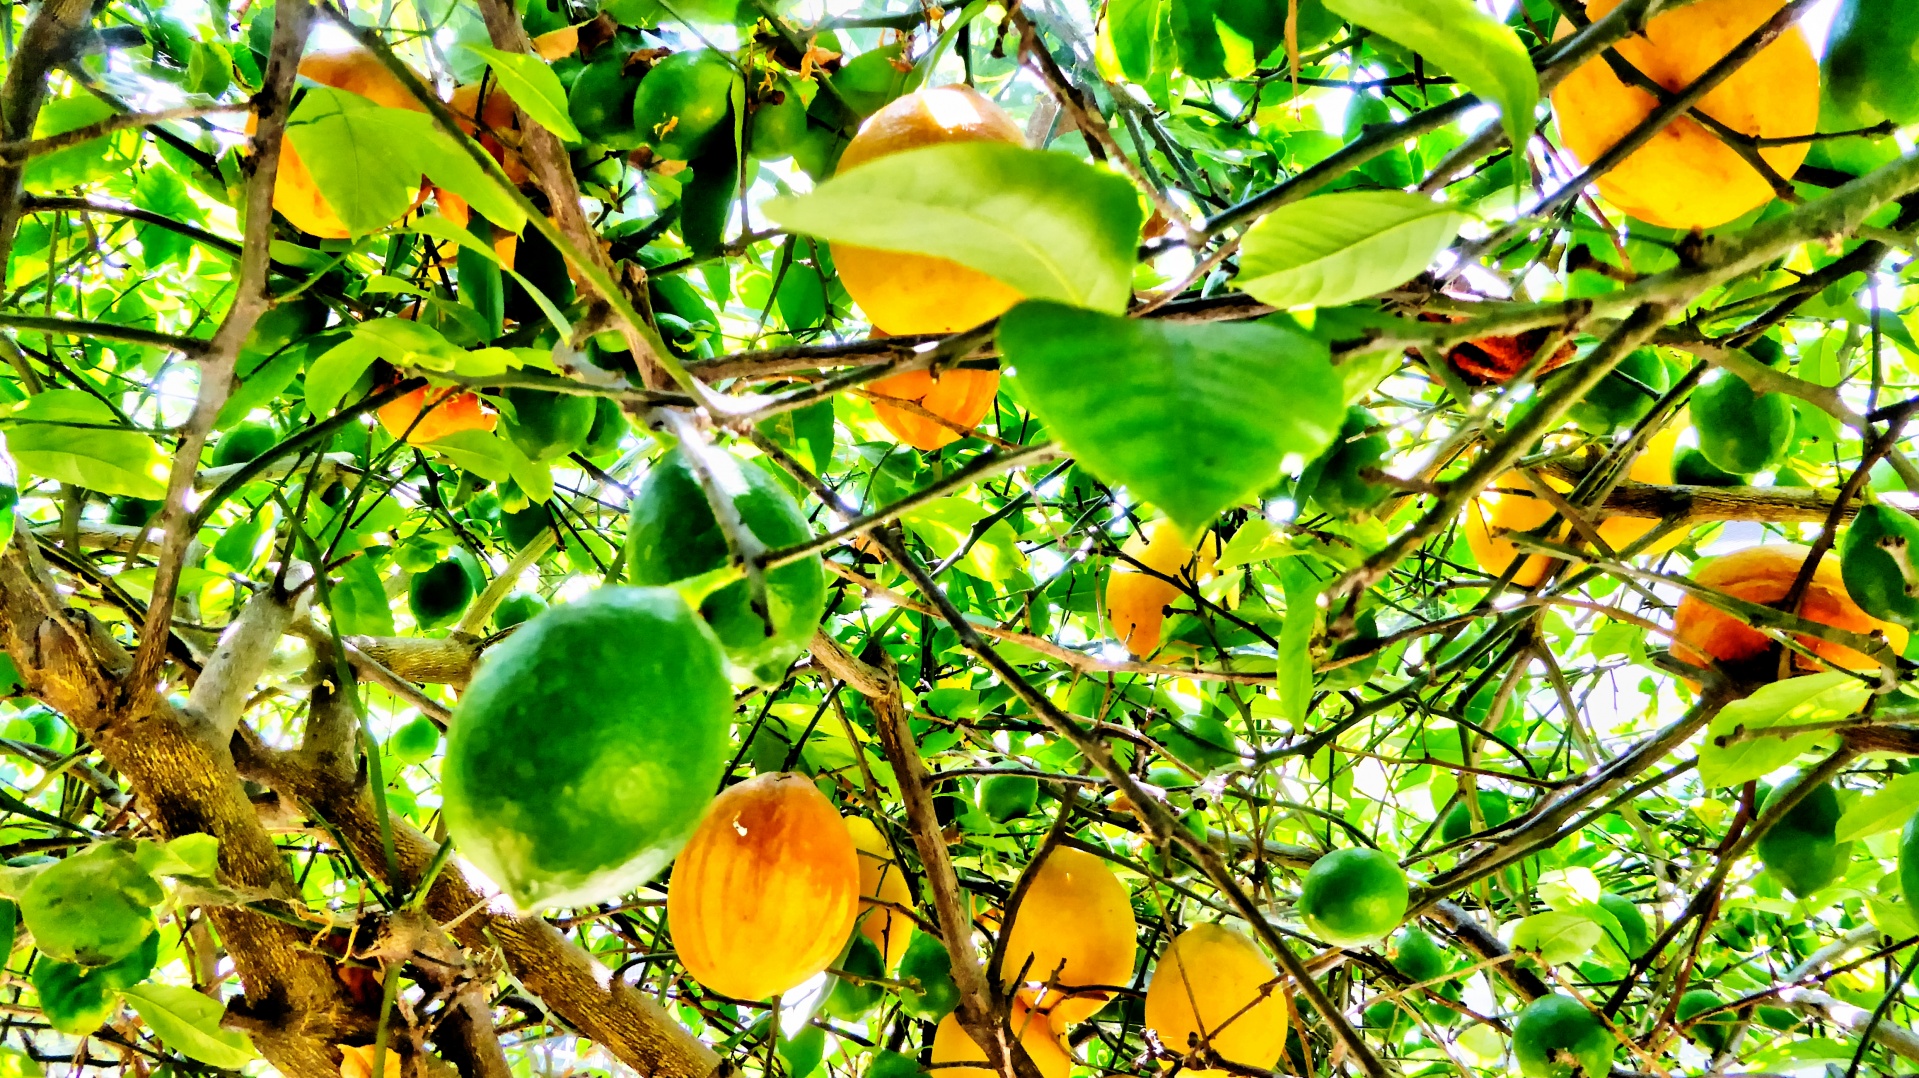 artistic effect applied to close-up of lemons in a tree